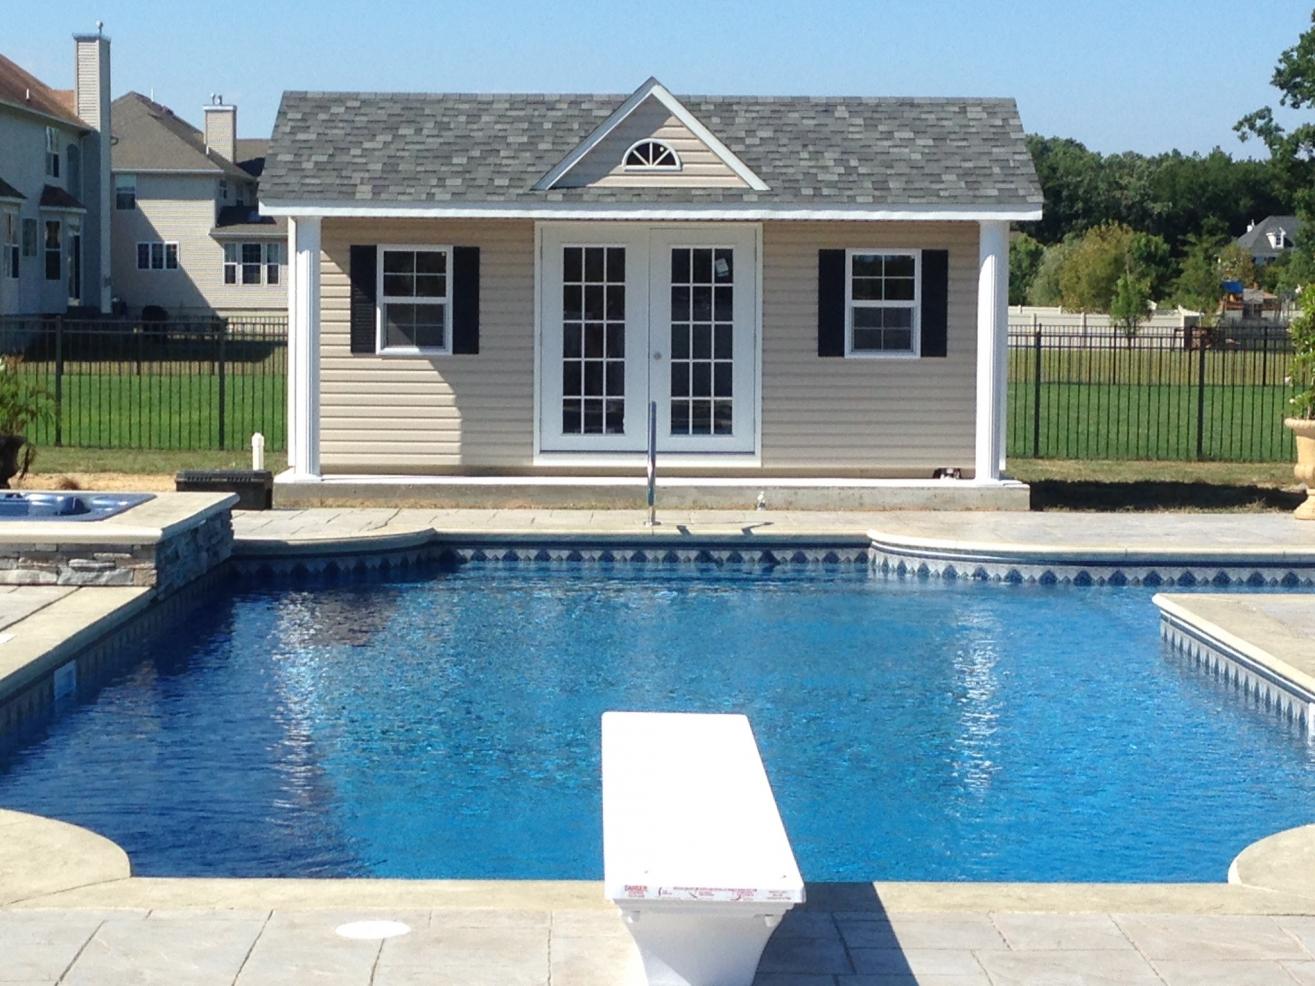 12x24 pool shed